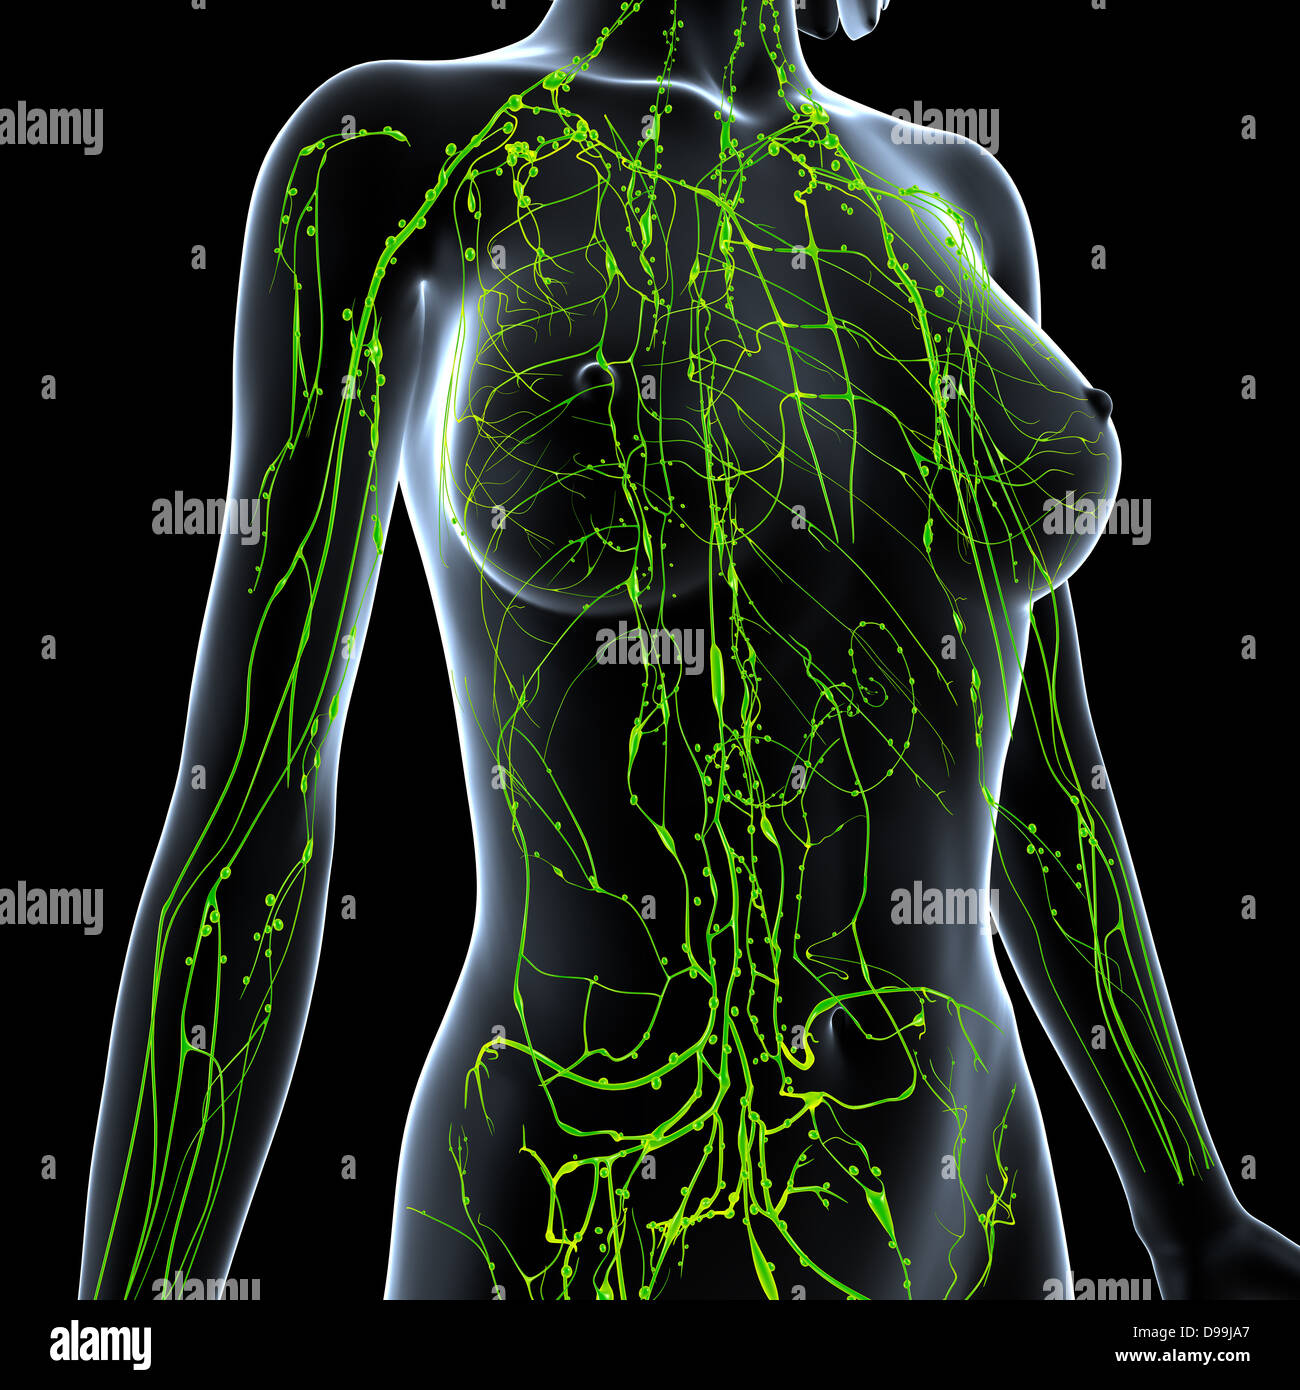 Lymphatic system of female body Stock Photo